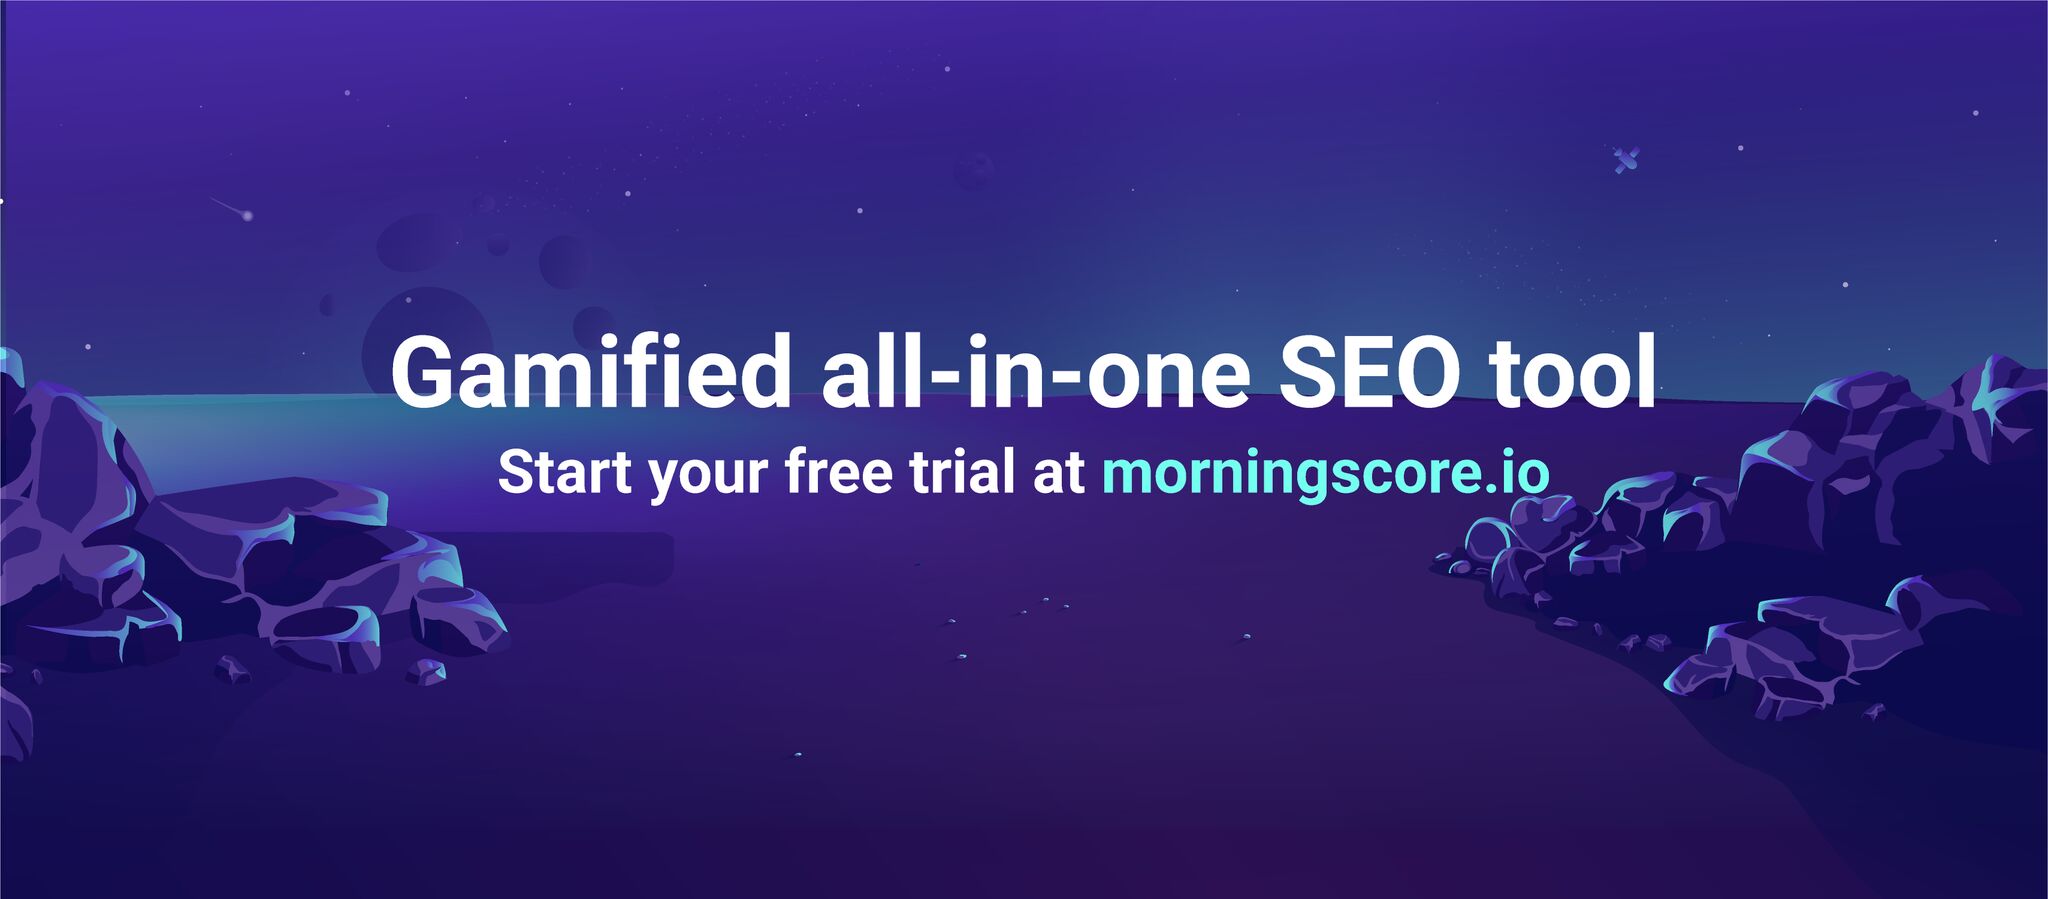 Upboost.ai and Morningscore.io Join Forces to Drive Webshop Growth and Dominance